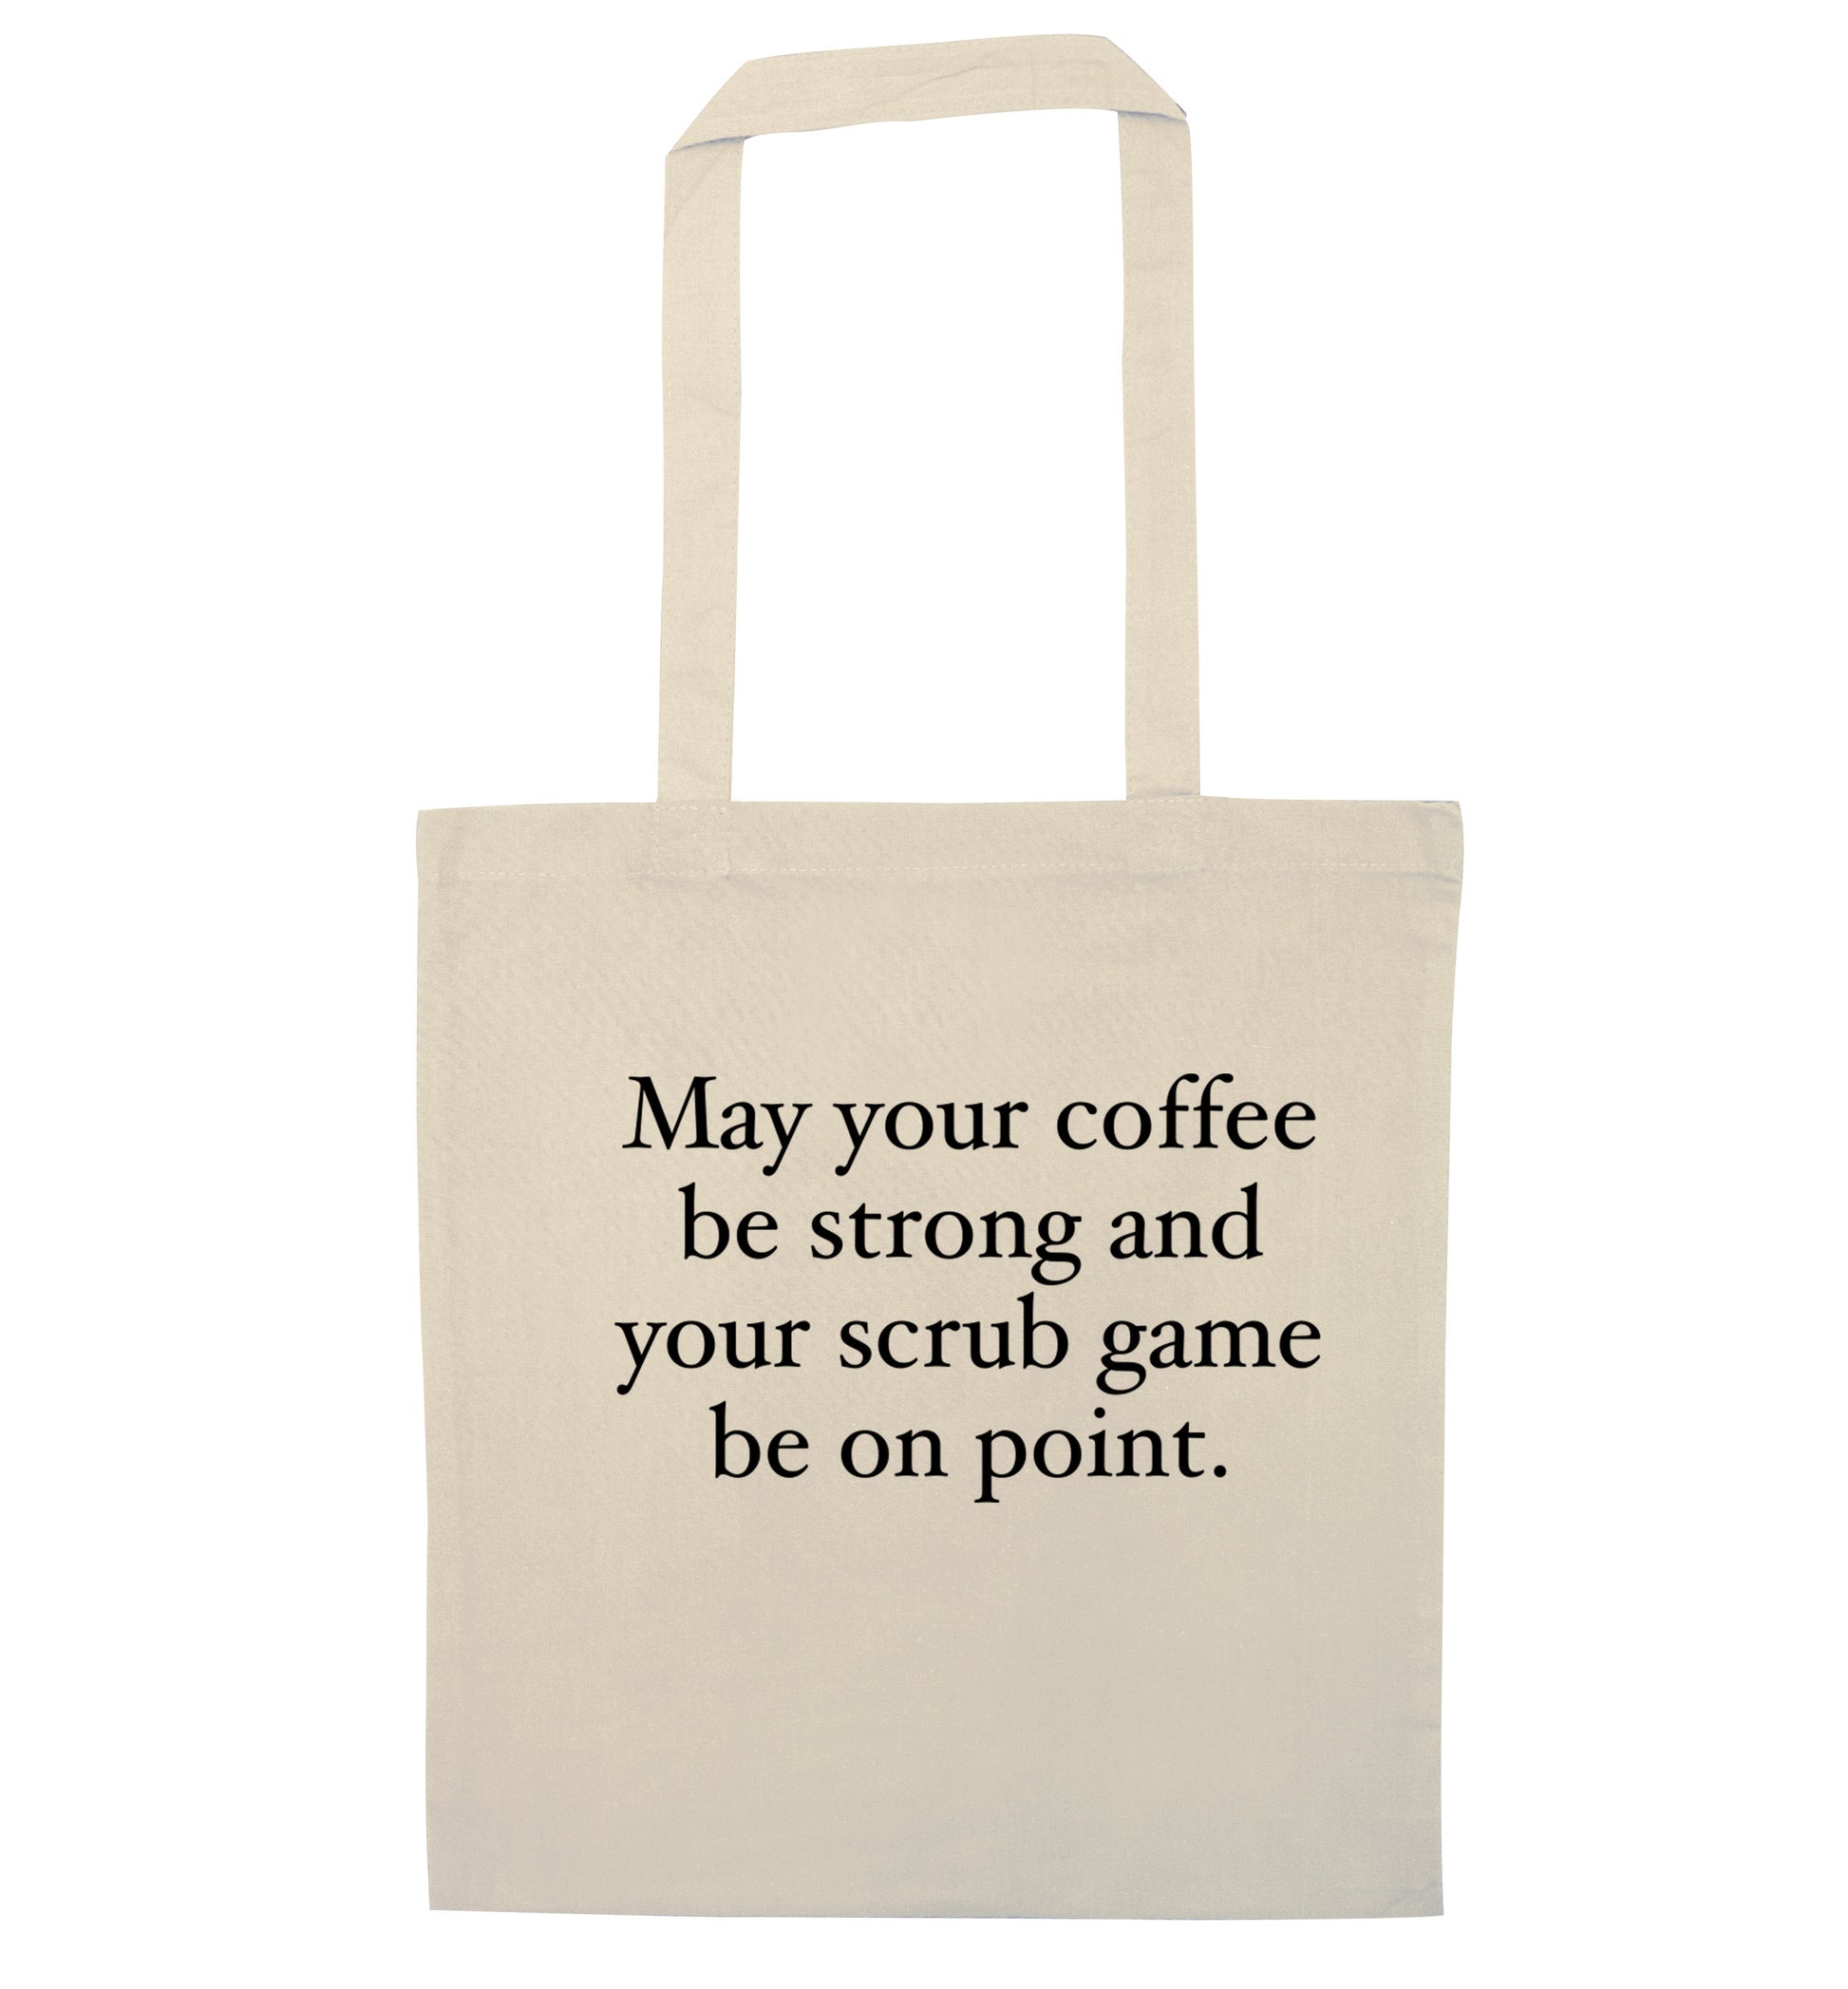 May your caffeine be strong and your scrub game be on point natural tote bag